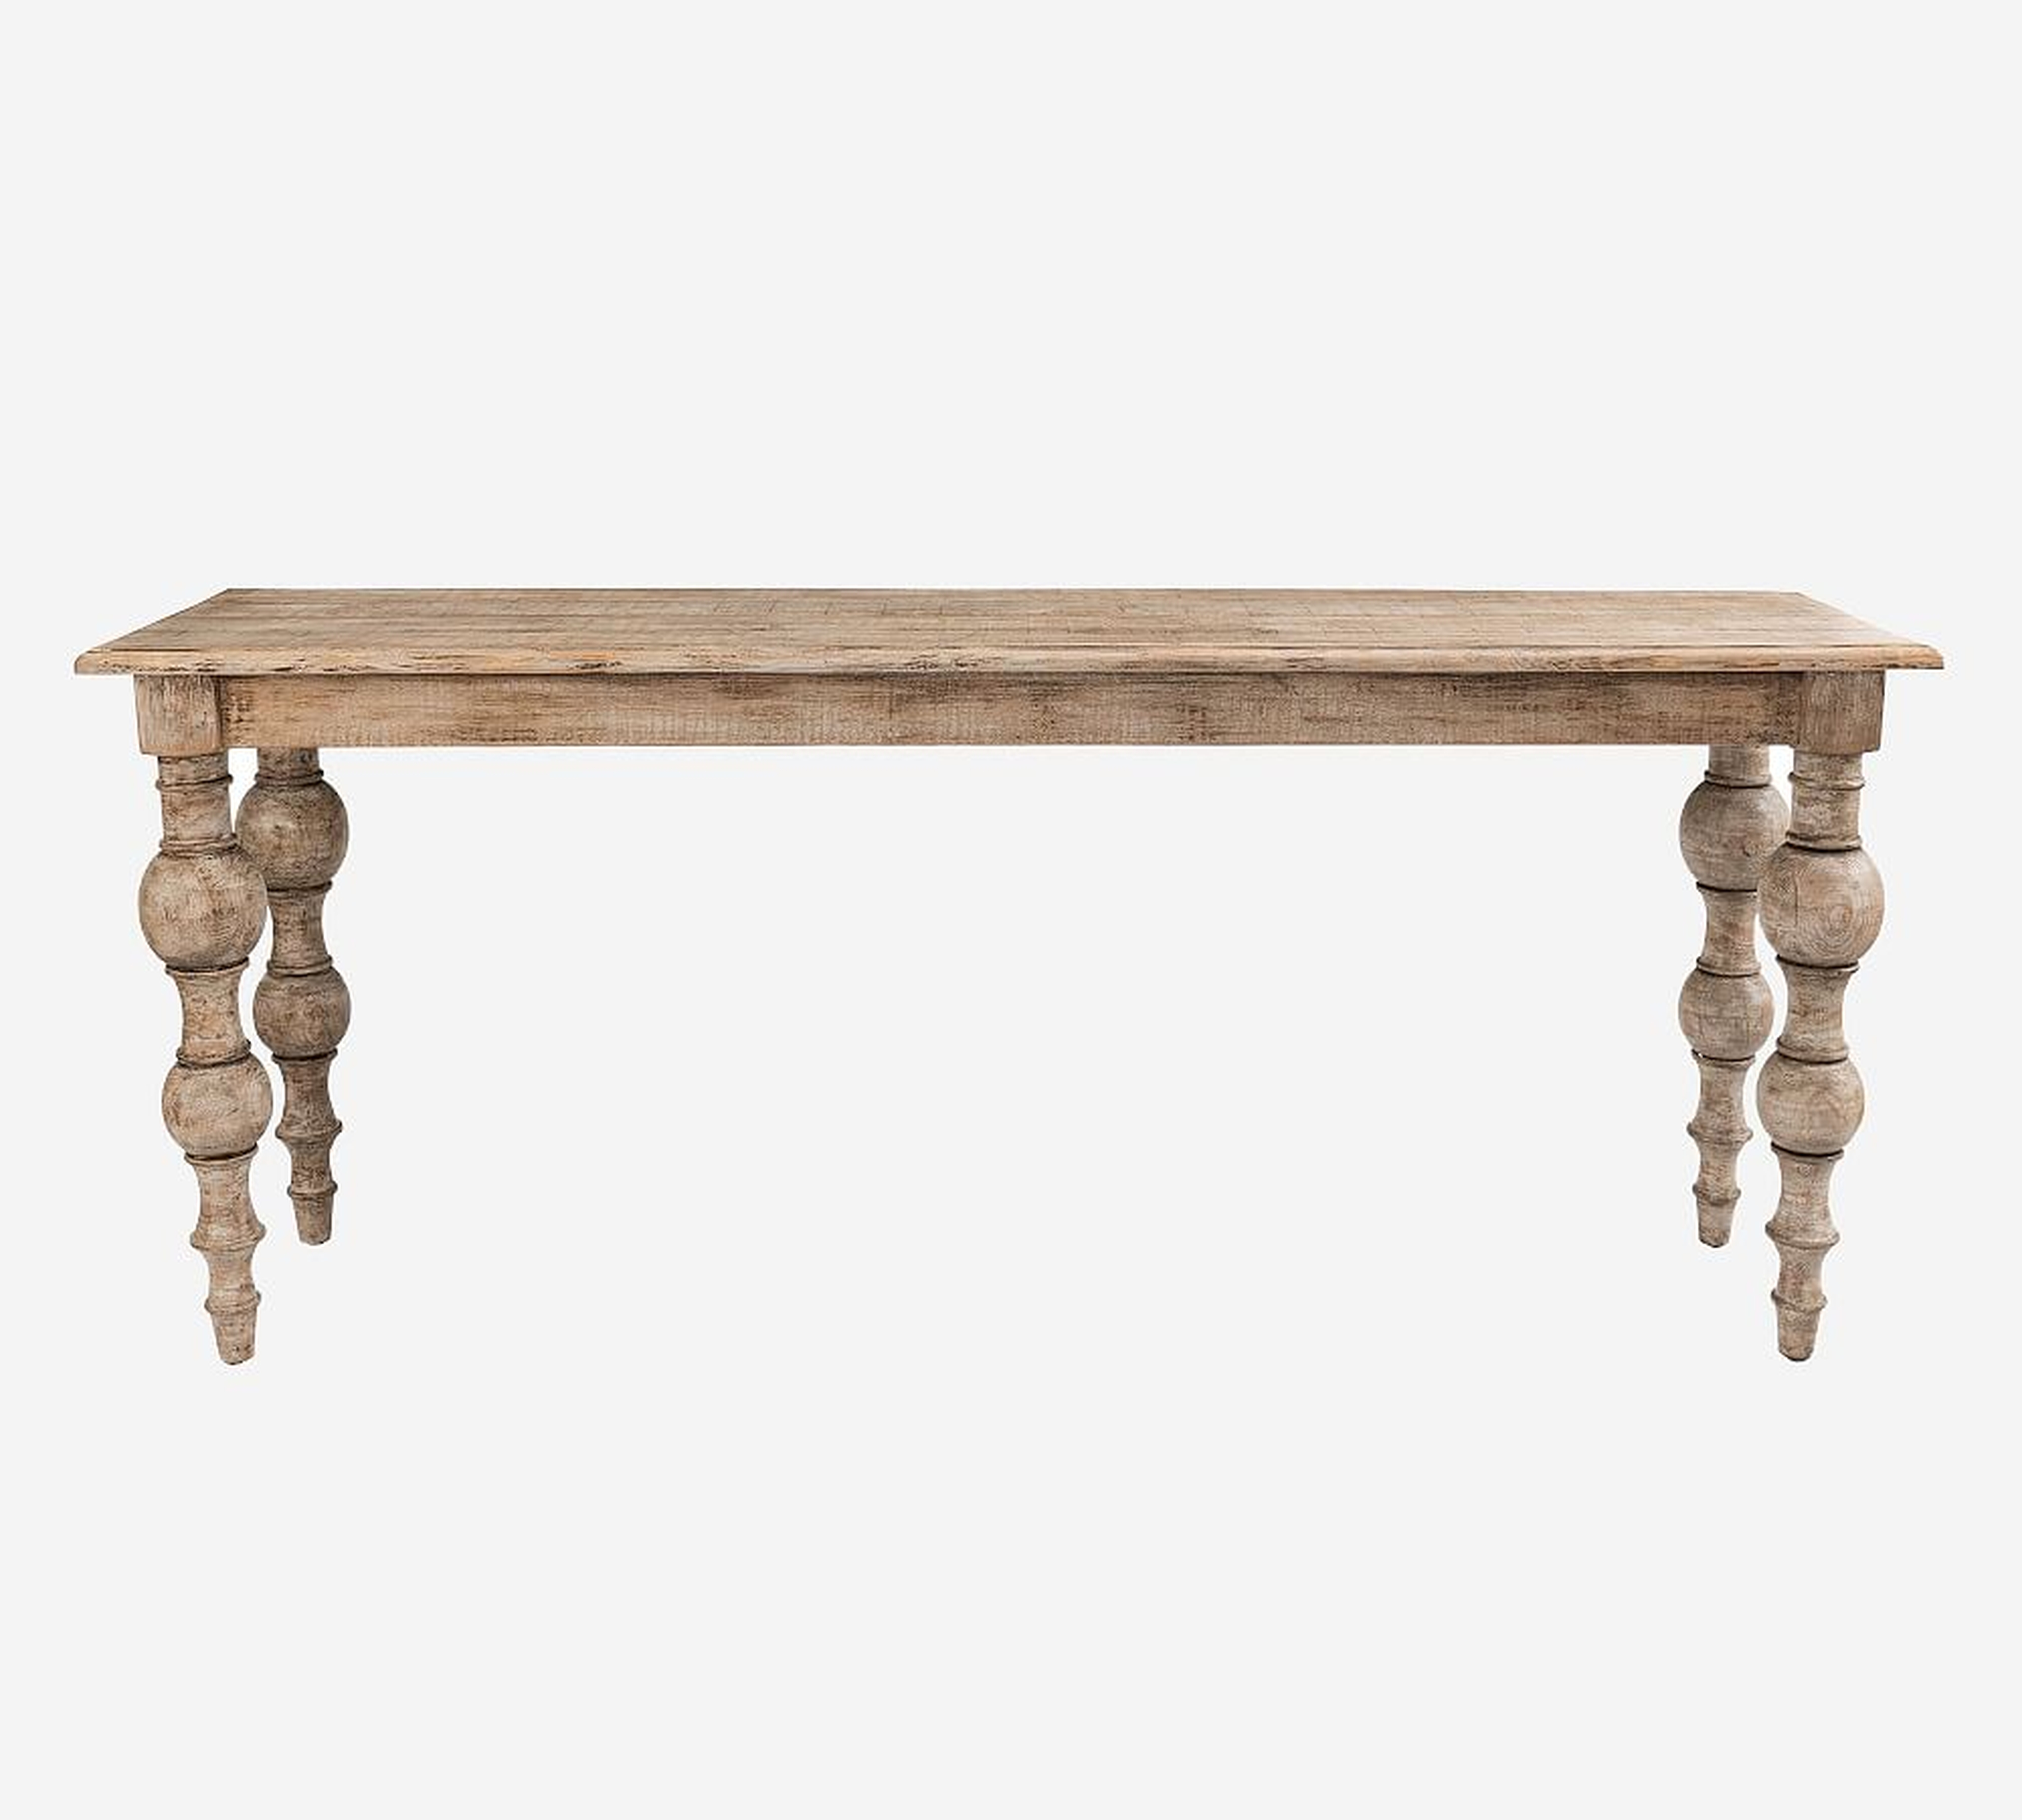 Bander 72" Reclaimed Wood Console Table, Natural - Pottery Barn